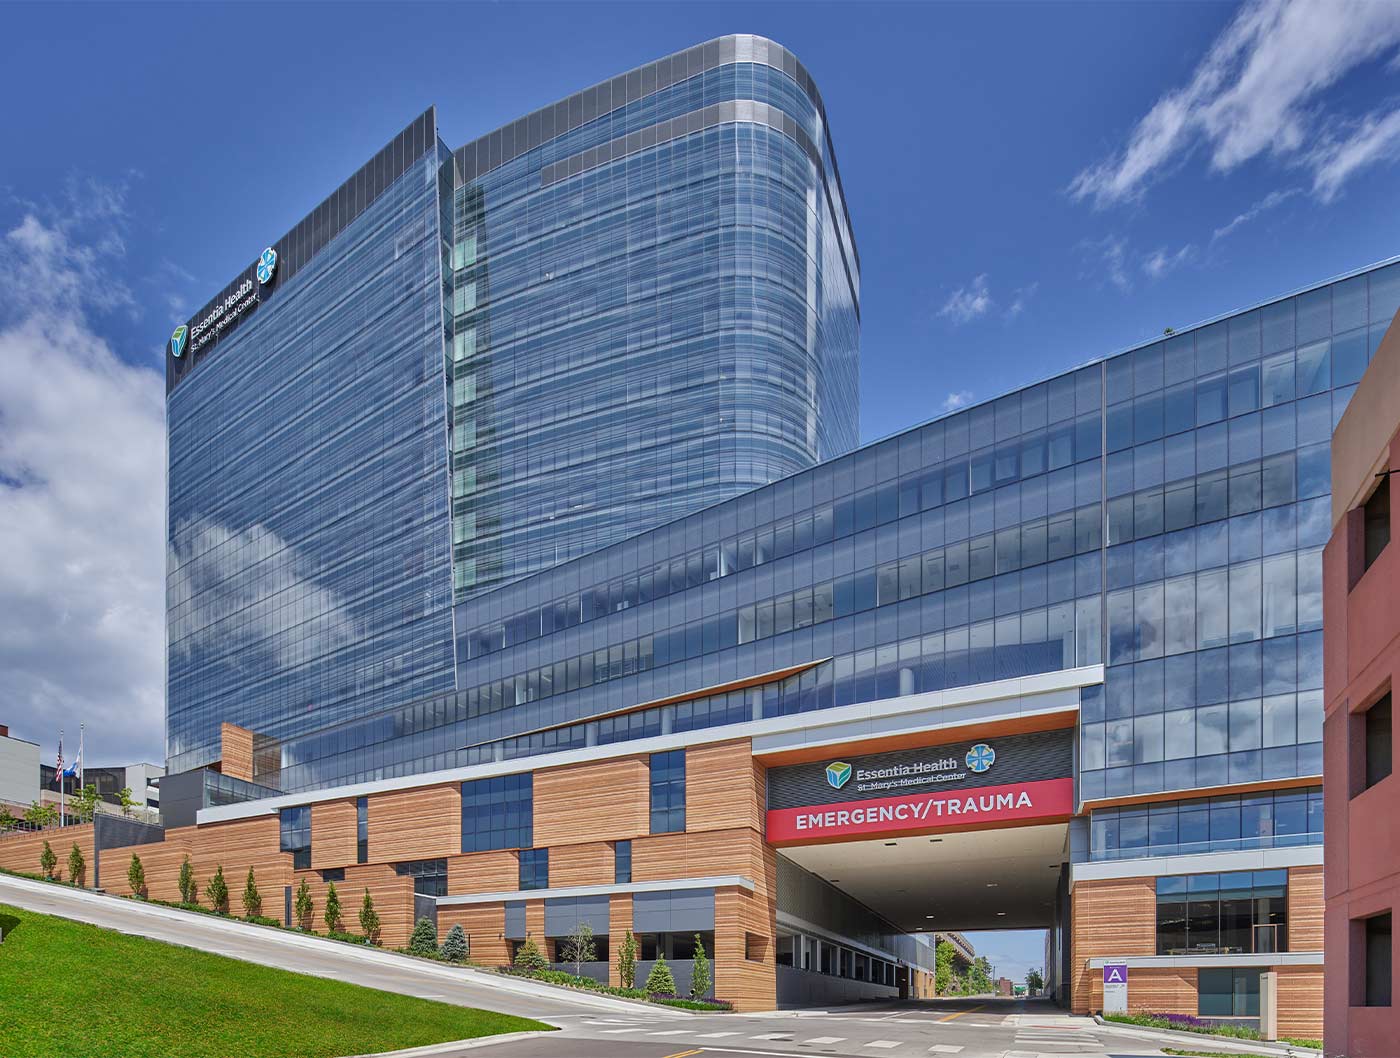 In Duluth, Minn., the new St. Mary’s Medical Center, designed by EwingCole, is now the largest healthcare facility in the region Photo courtesy EwingCole